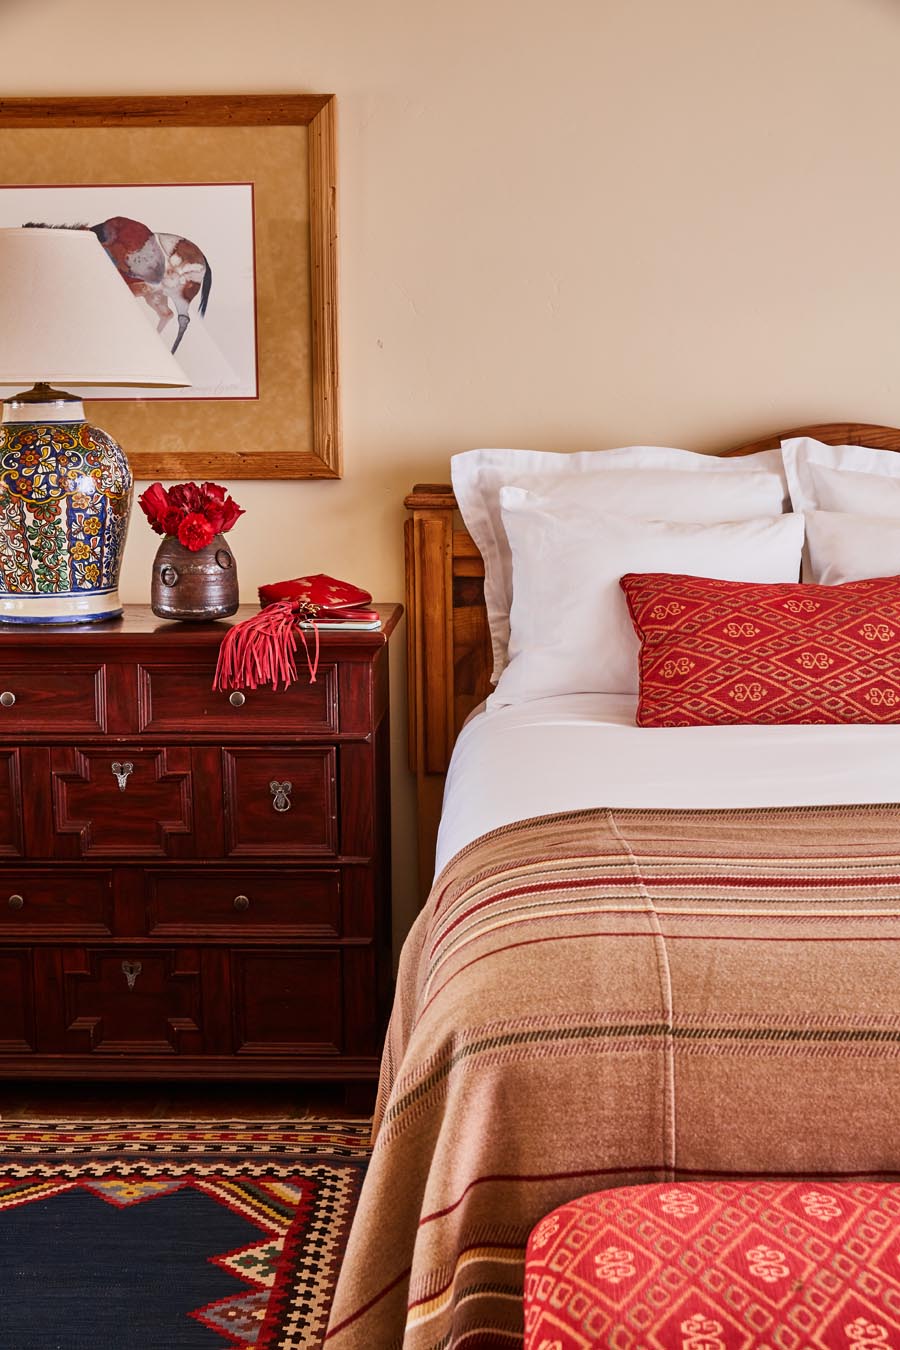 Bed with red pillow beside dresser and lamp